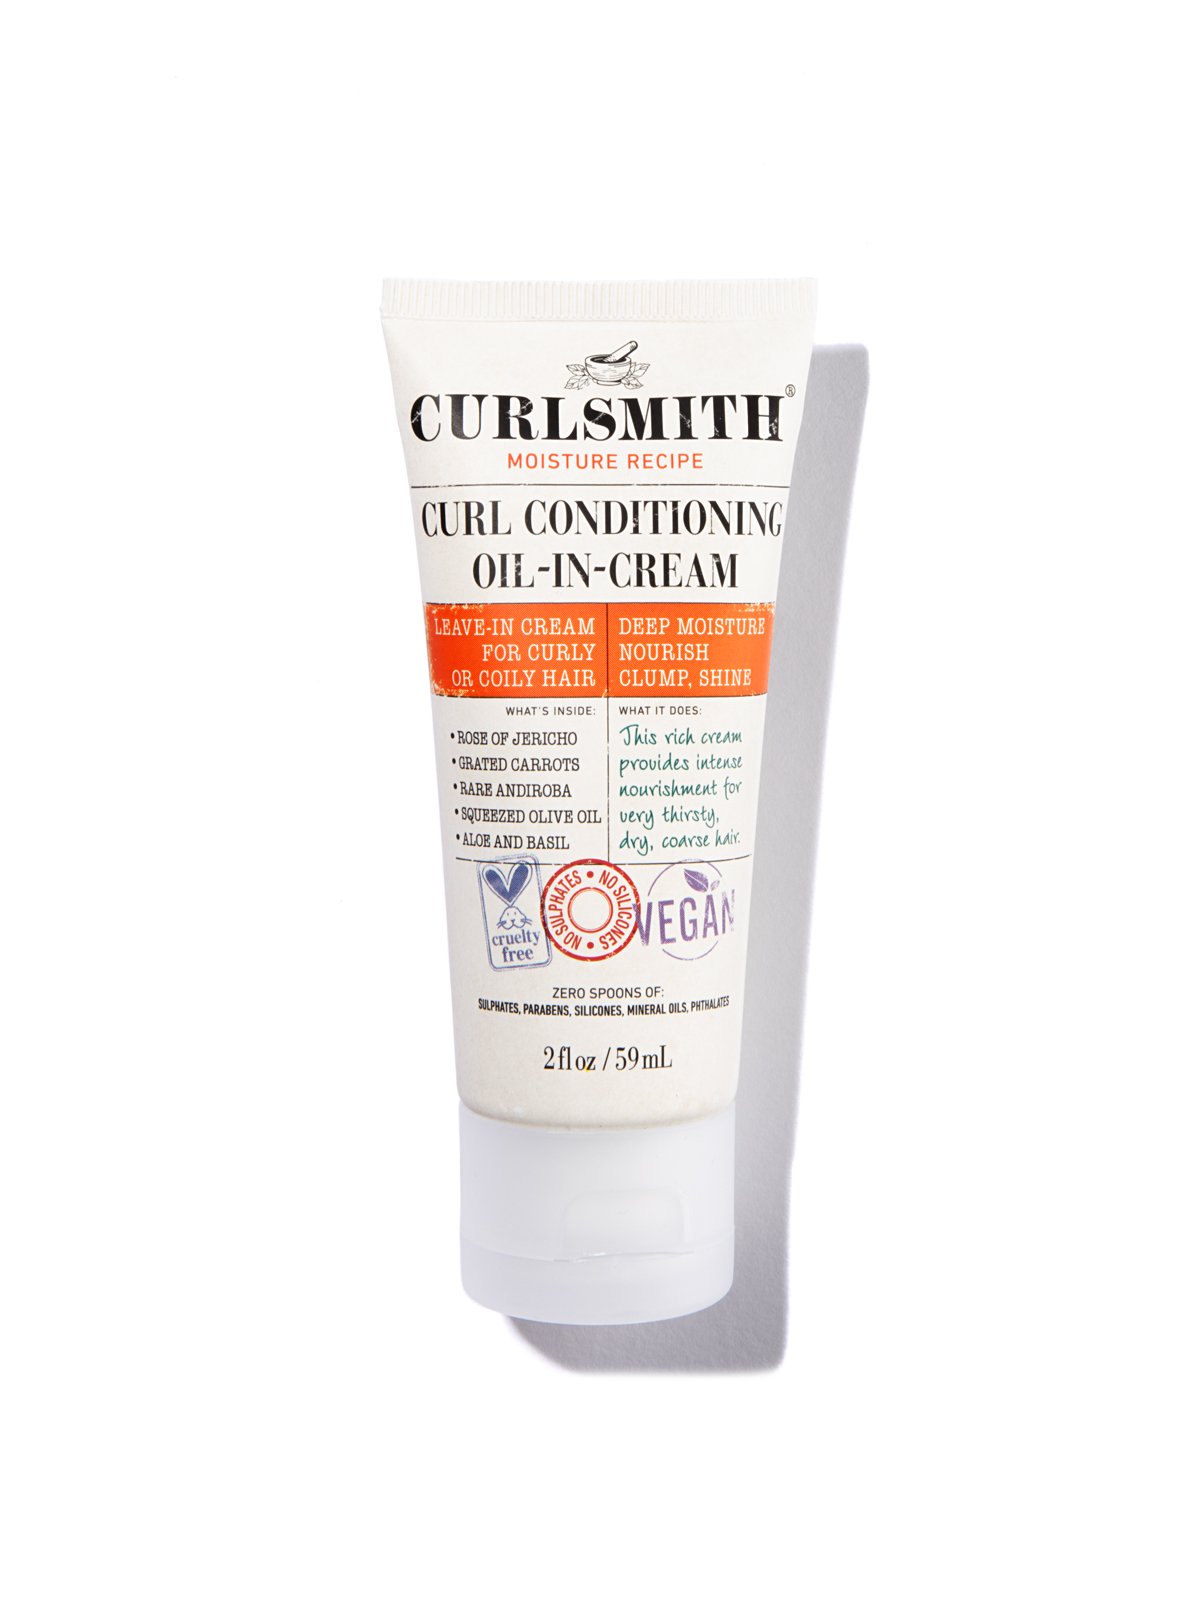 Curlsmith Curl Conditioning Oil-in-Cream - Travel Size